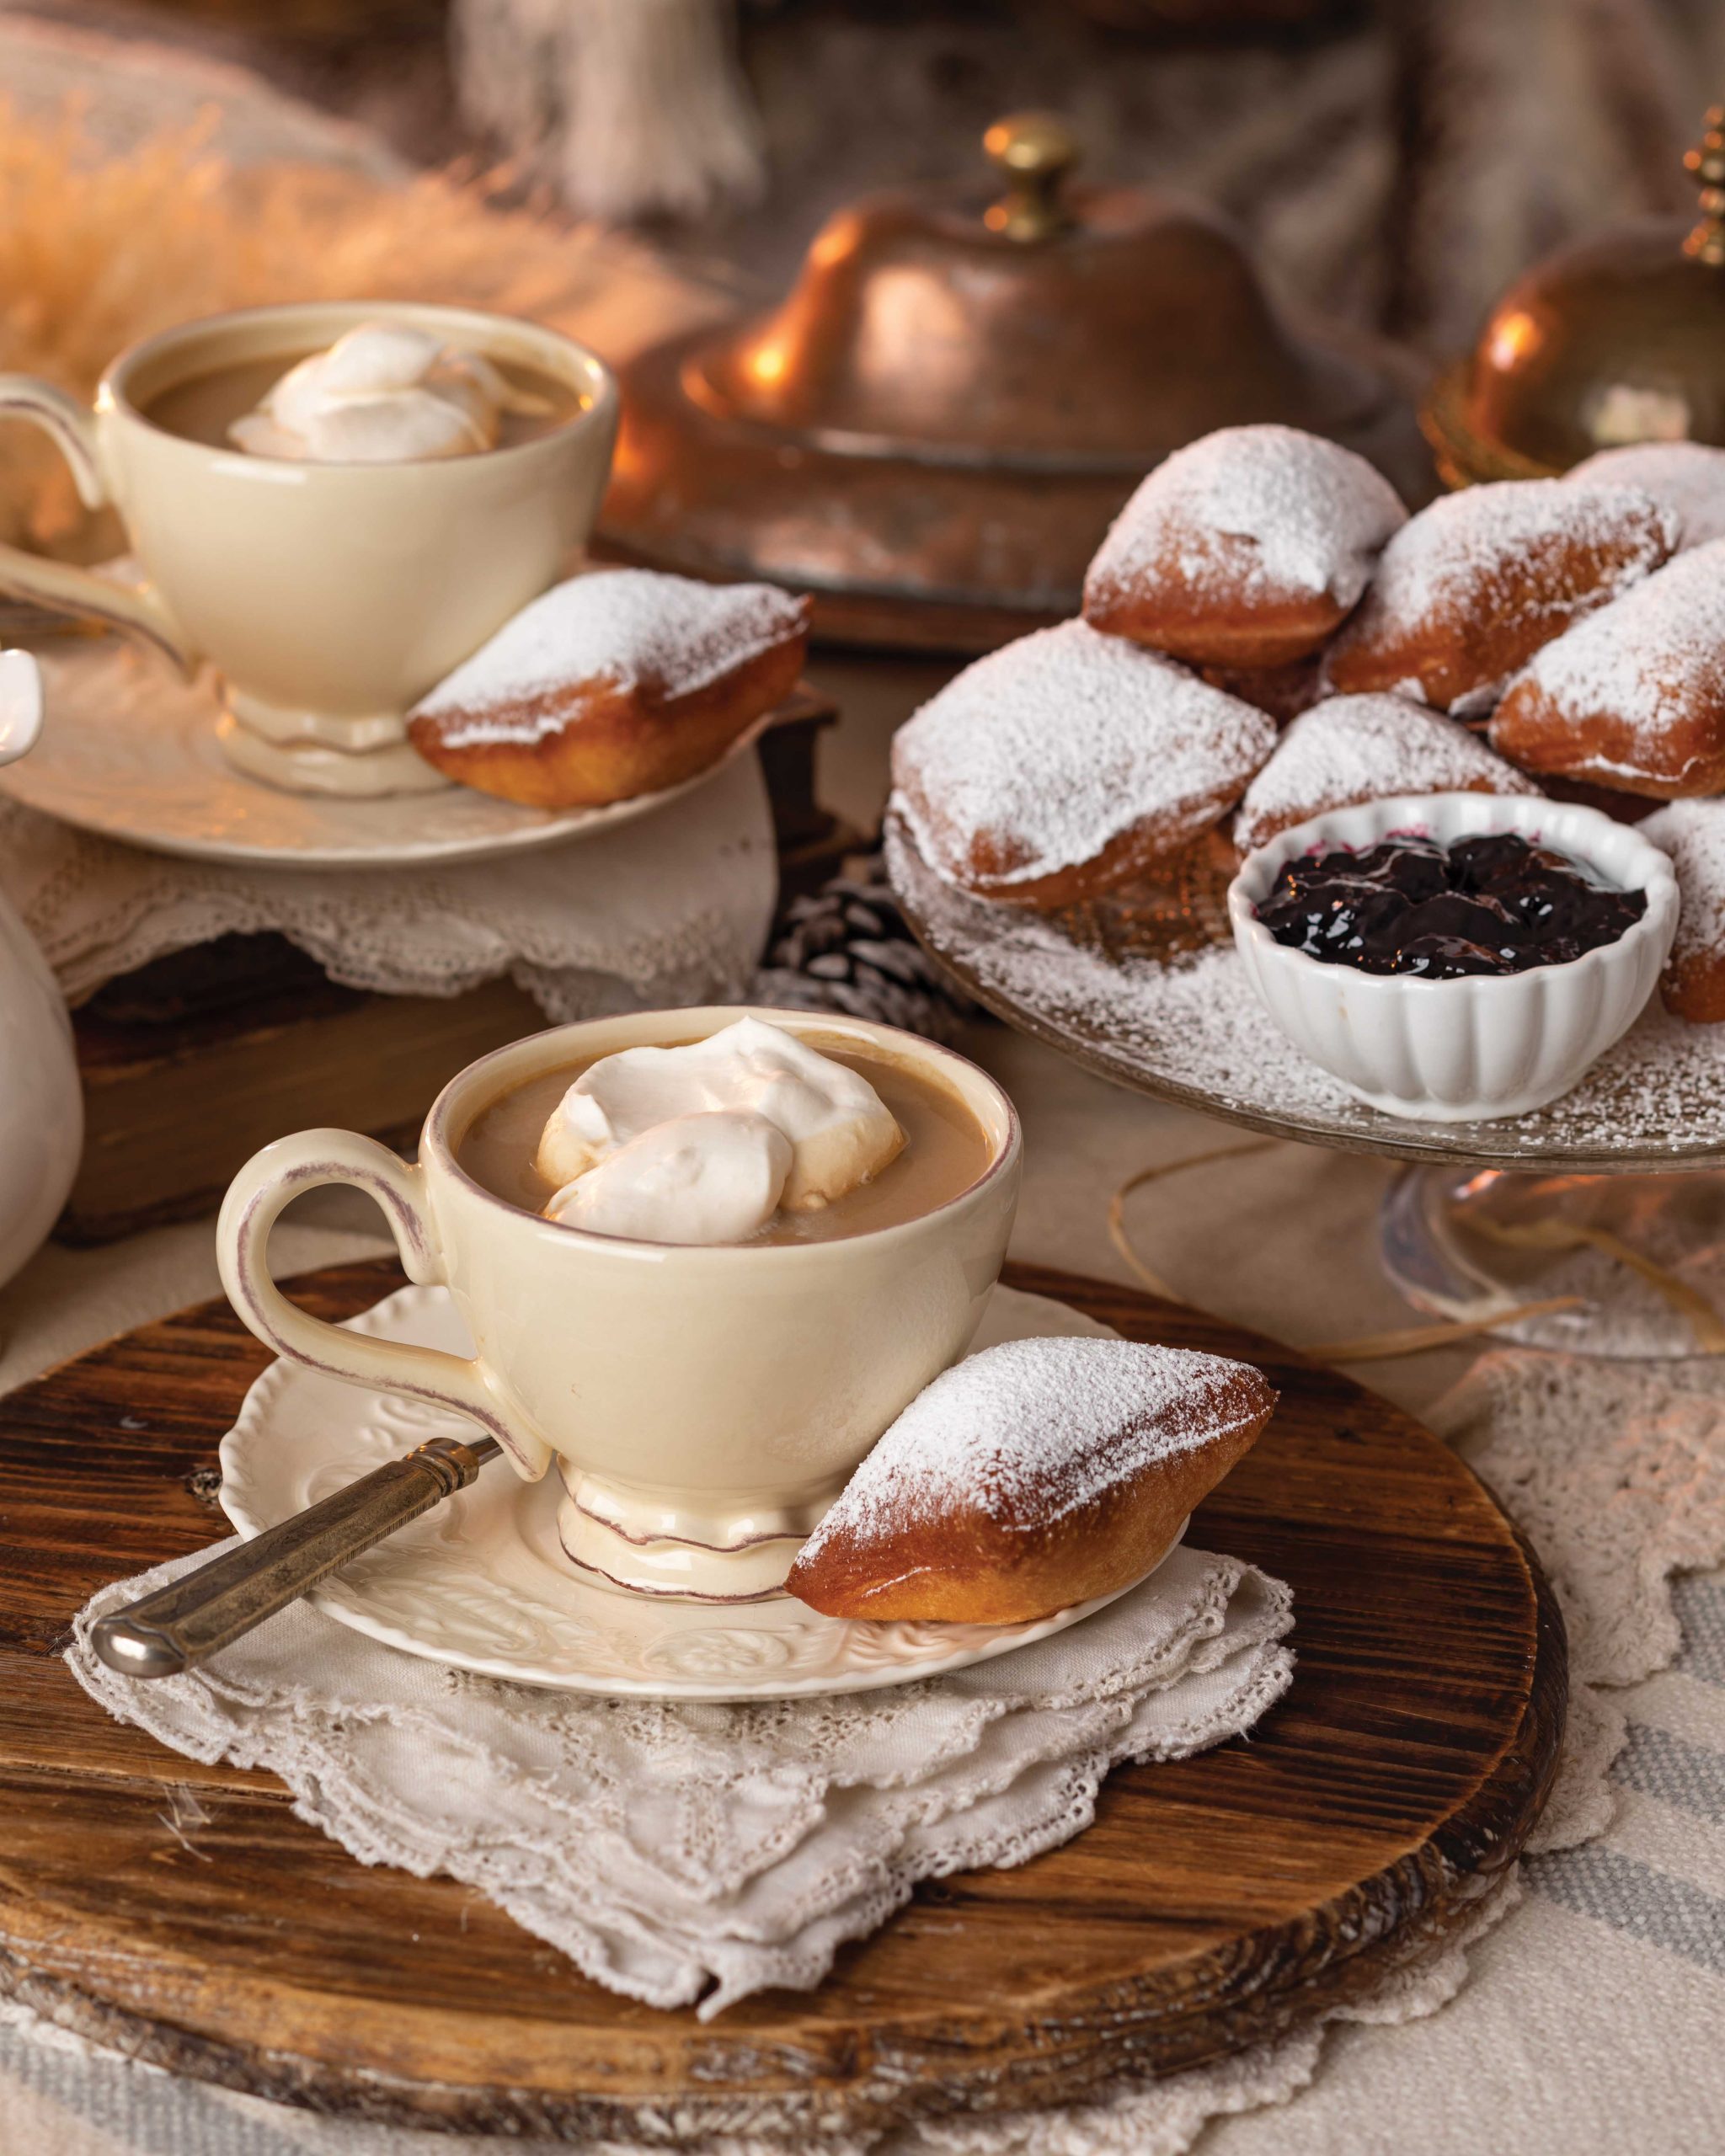 Confectioners’ sugar-sprinkled beignets and cozy white mugs of café au lait await indulgence atop a rustic table.